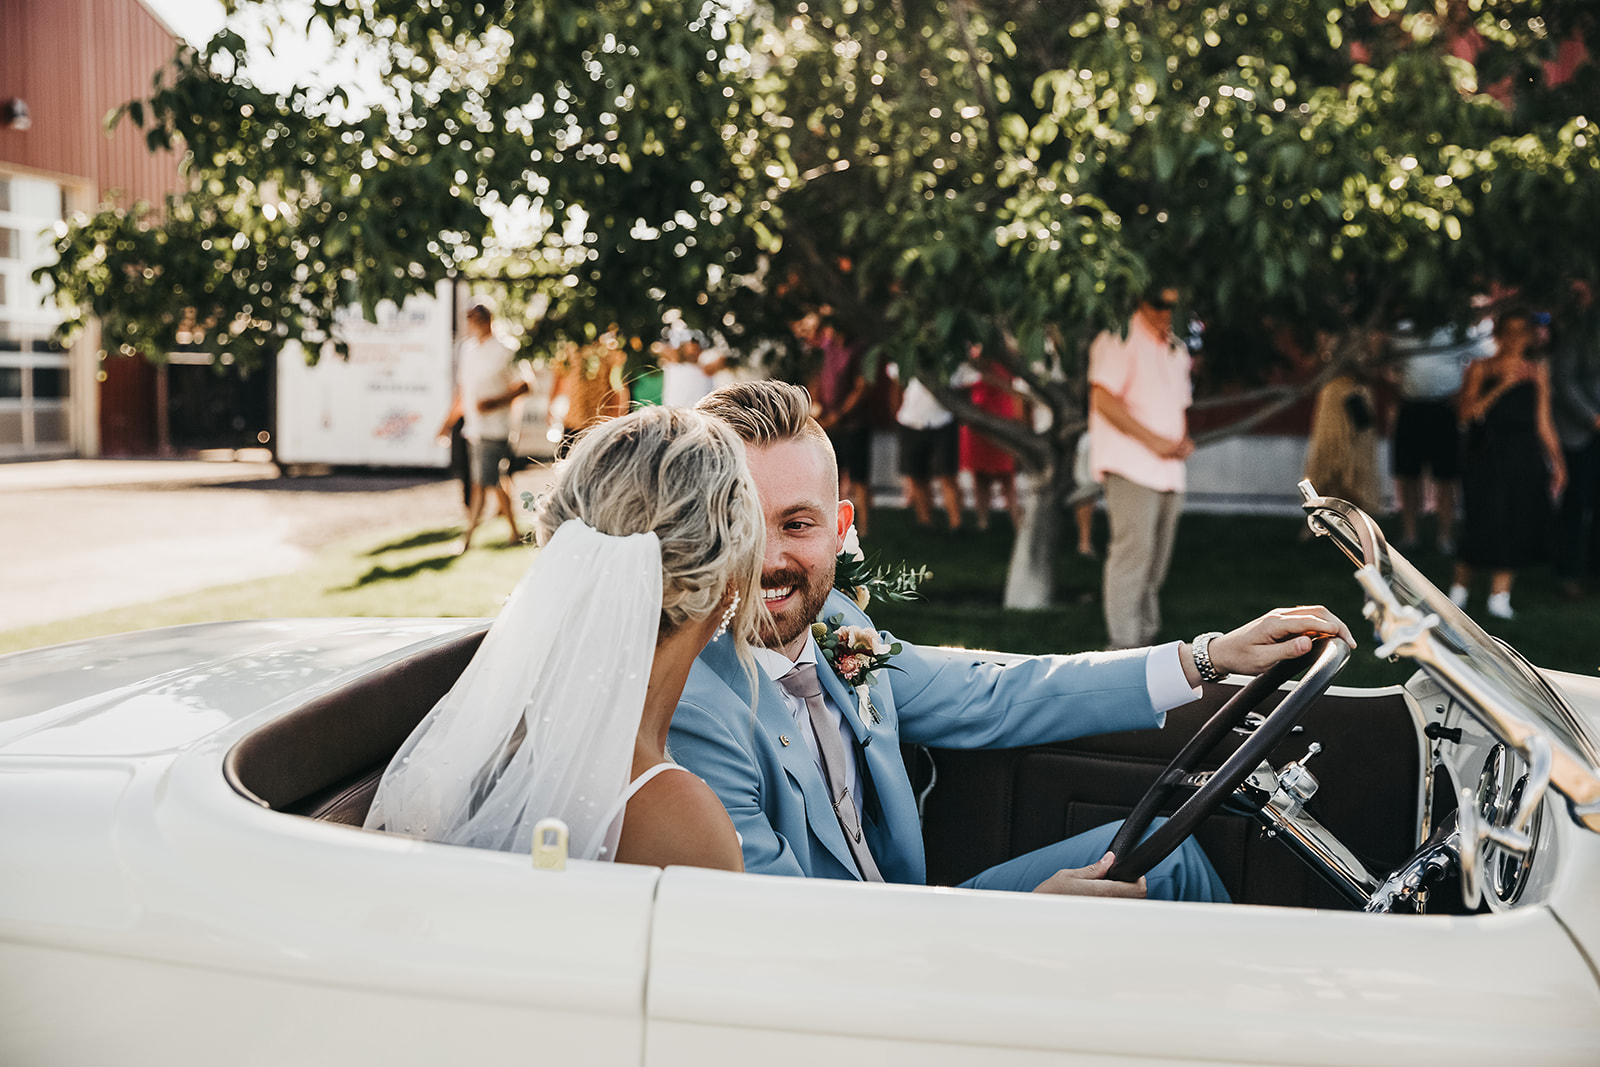 Bride and groom drive away in white classic car after just saying I do